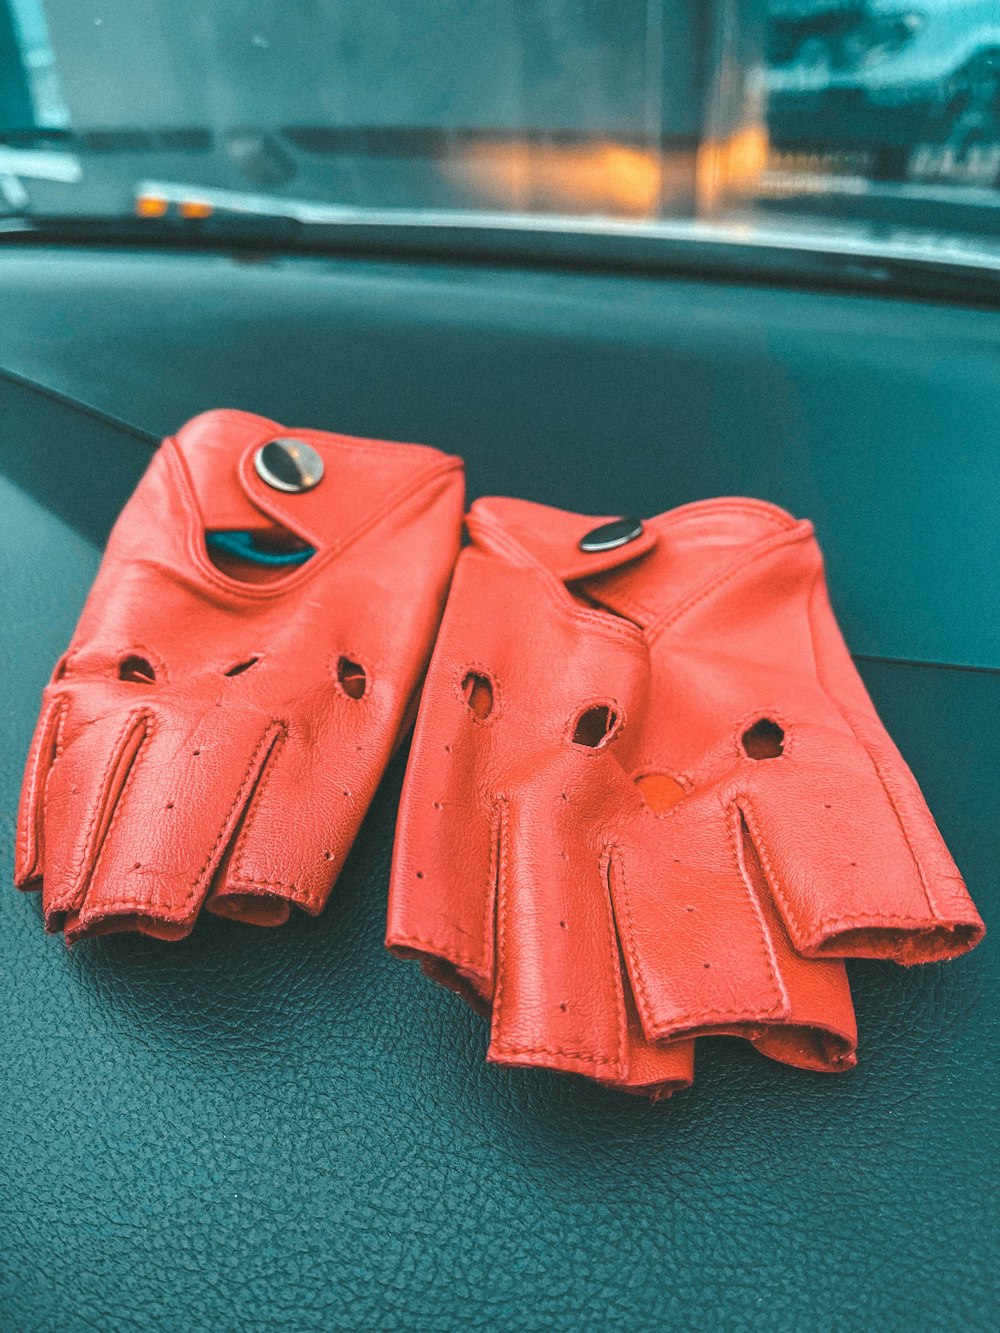 a pair of red leather gloves sitting on top of a car dashboard